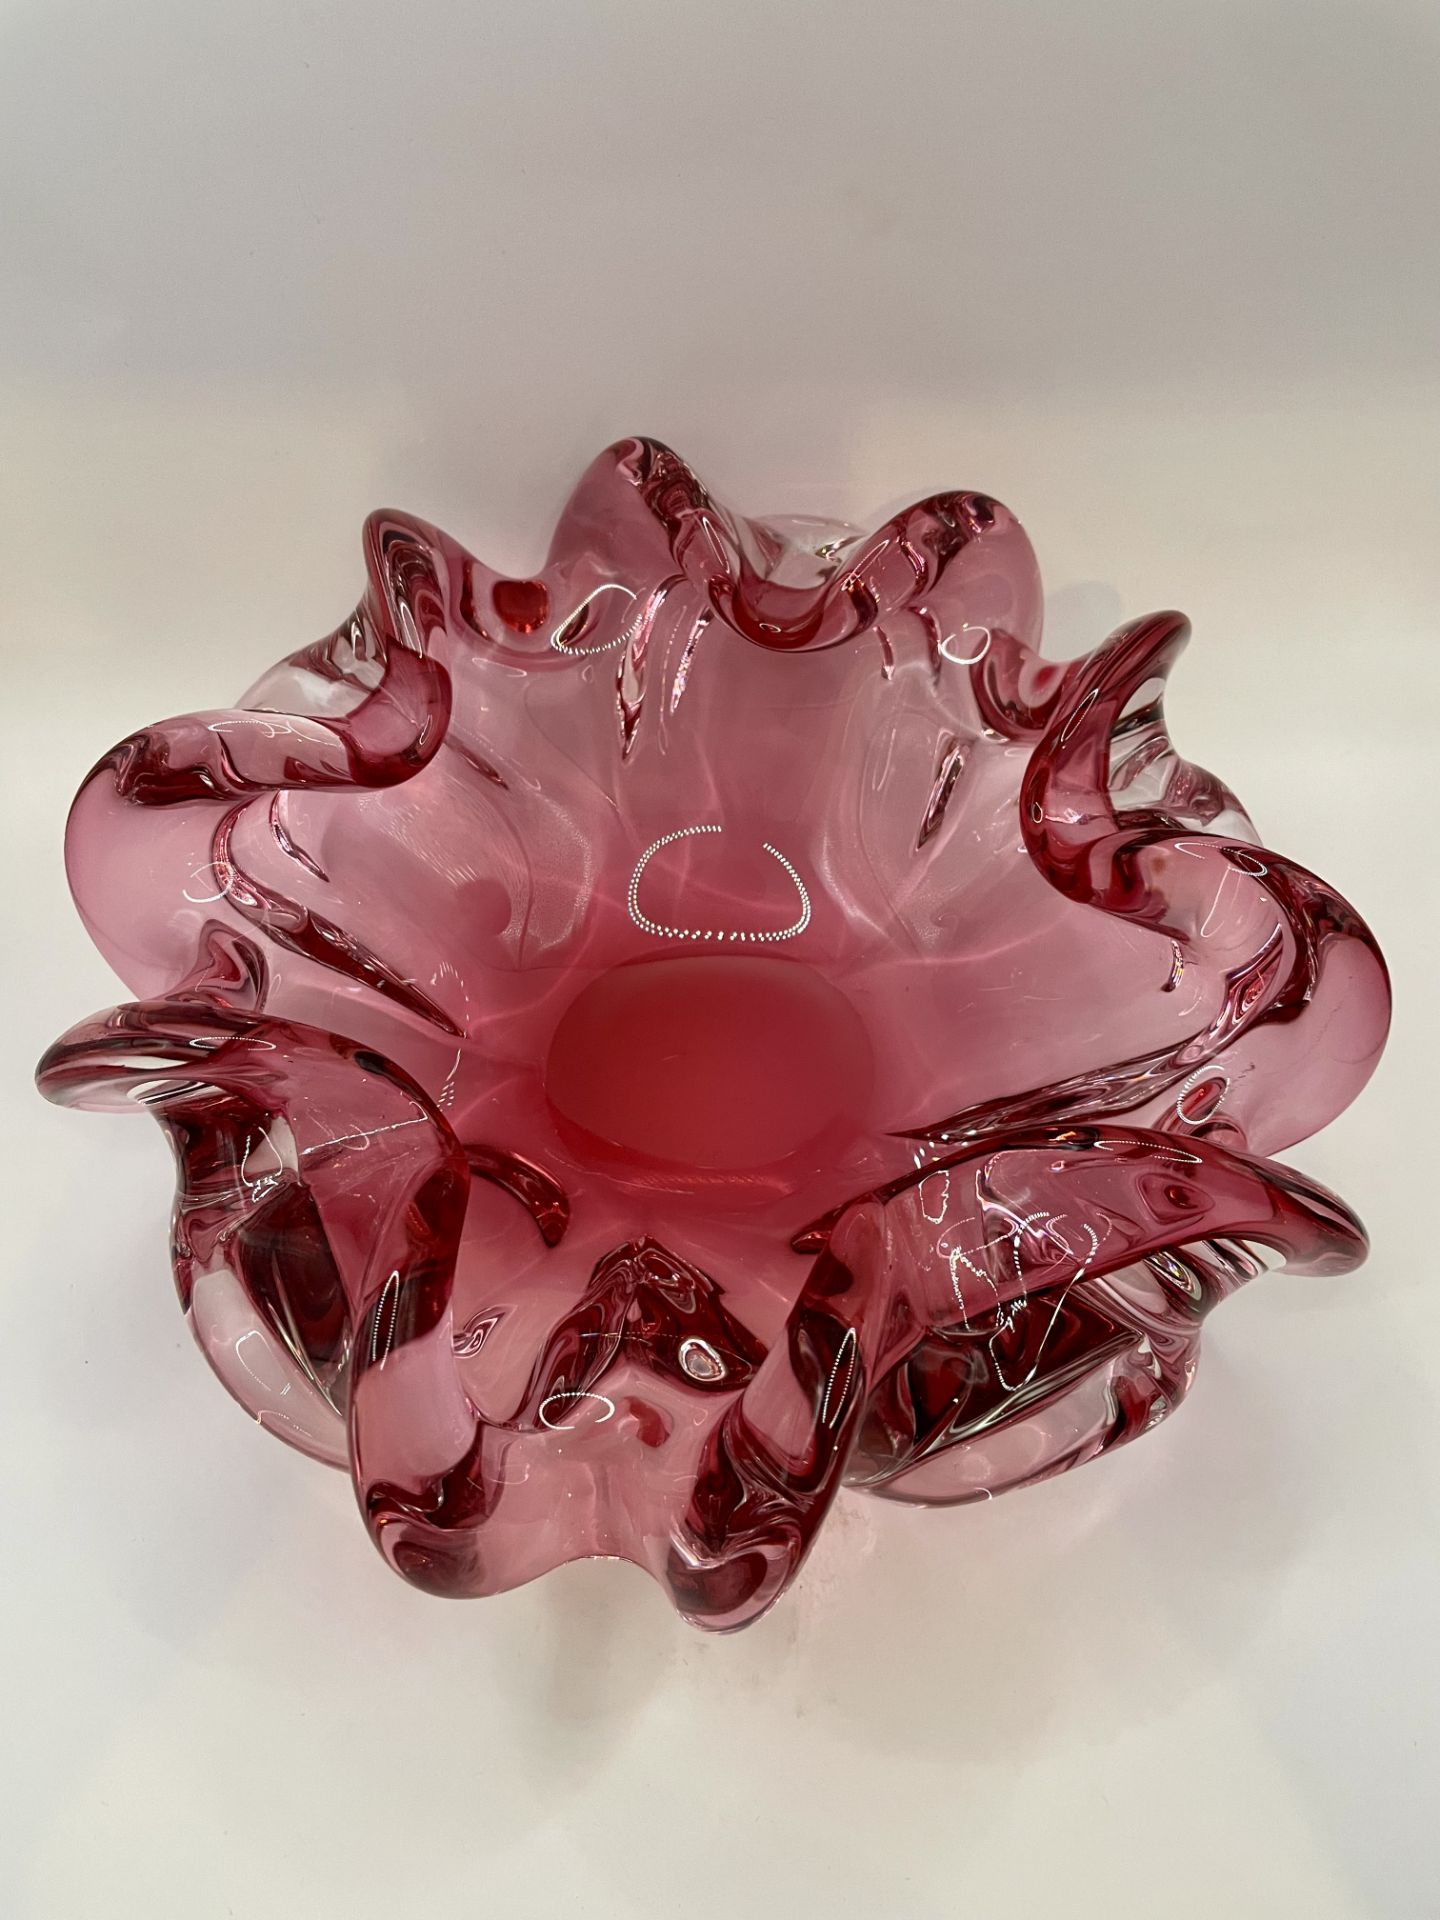 VETRI MURANO GLASS SOMMERSO CENTREPIECE BOWL RUFFLED CRANBERRY ITALY 1950'S - Image 8 of 18